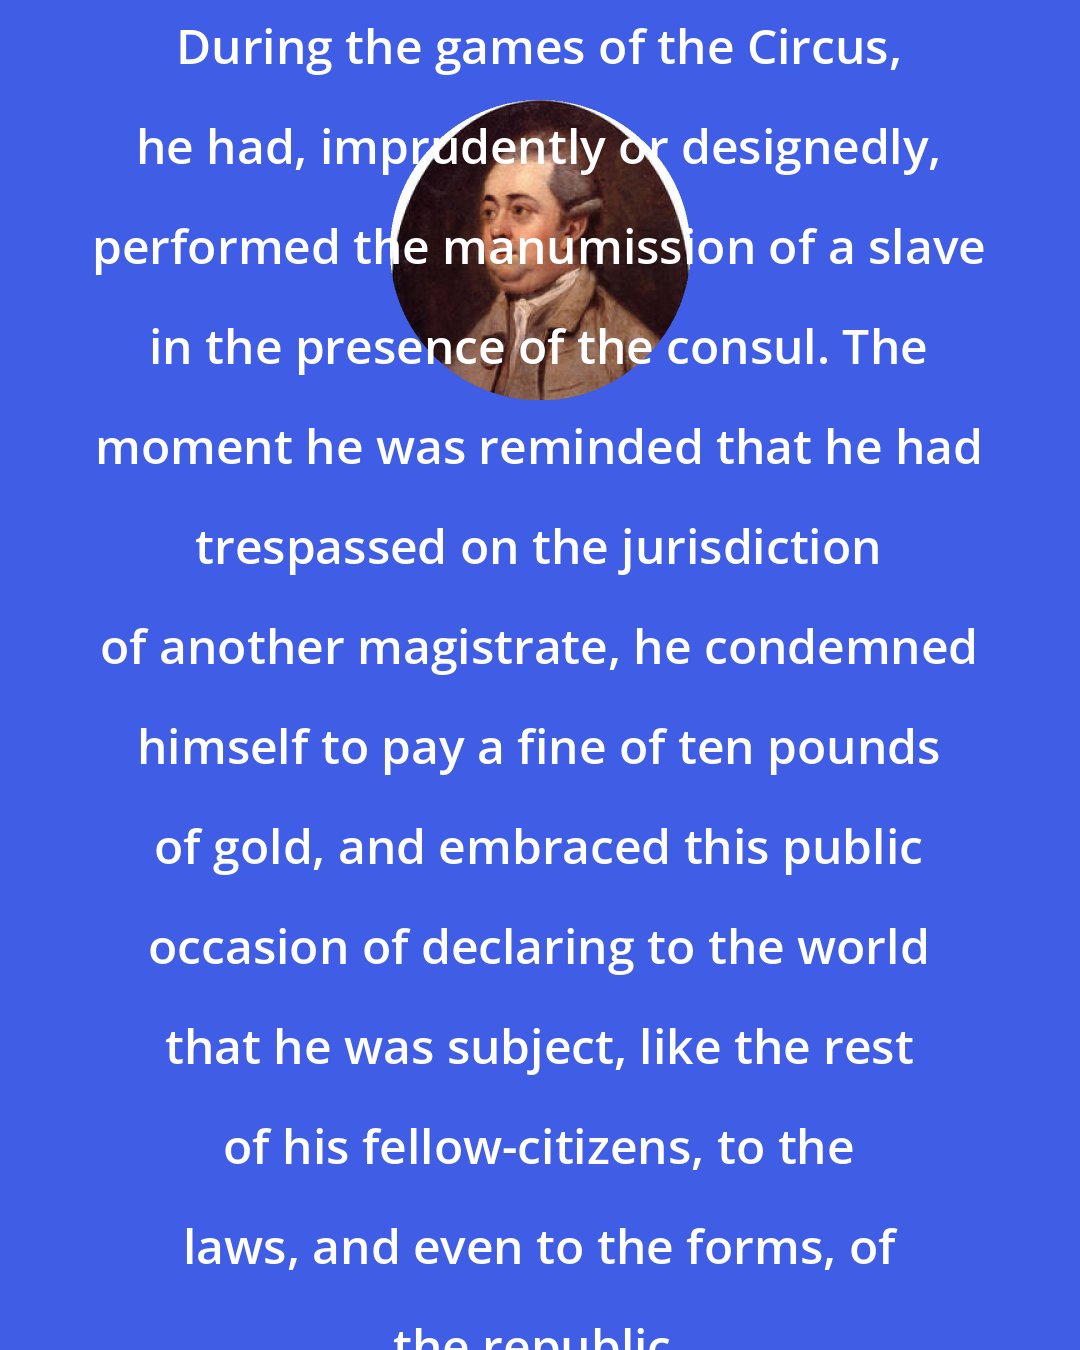 Edward Gibbon: During the games of the Circus, he had, imprudently or designedly, performed the manumission of a slave in the presence of the consul. The moment he was reminded that he had trespassed on the jurisdiction of another magistrate, he condemned himself to pay a fine of ten pounds of gold, and embraced this public occasion of declaring to the world that he was subject, like the rest of his fellow-citizens, to the laws, and even to the forms, of the republic.